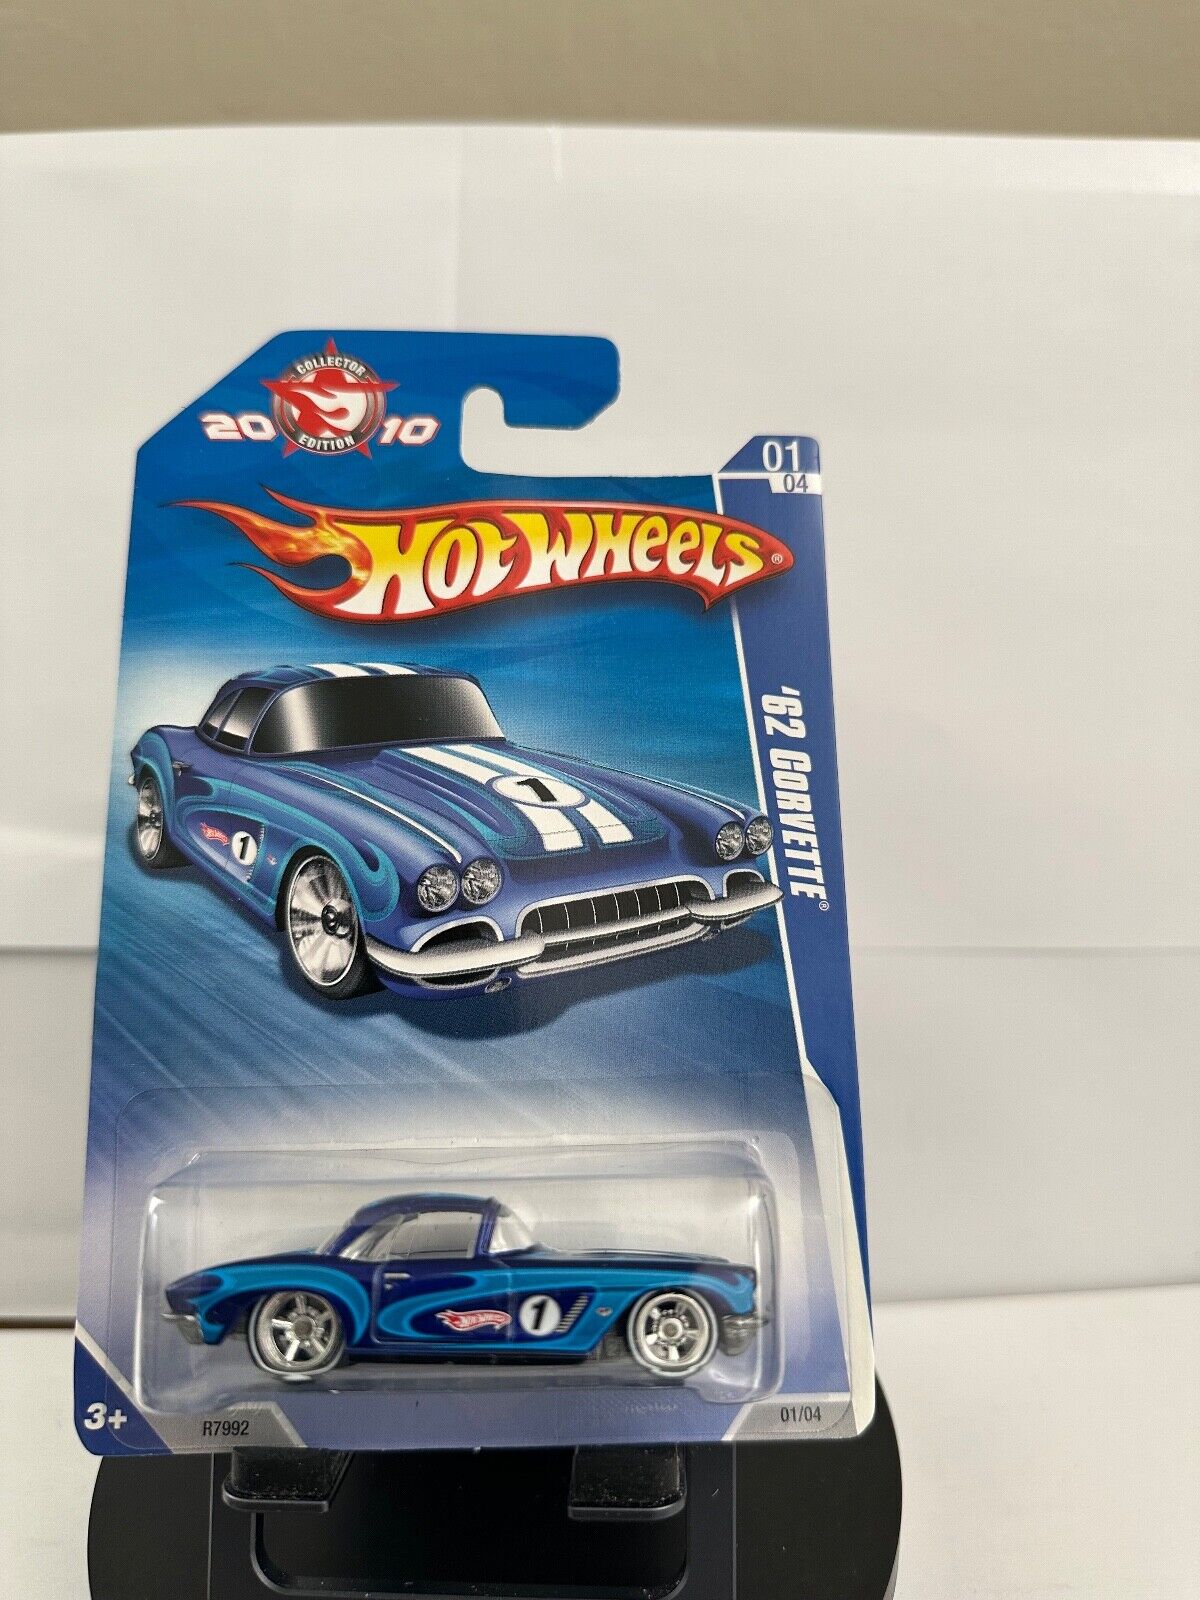 Hot Wheels 2010 Collectors Edition '62 Corvette w/ Real Rider Mail-In Kmart  L62